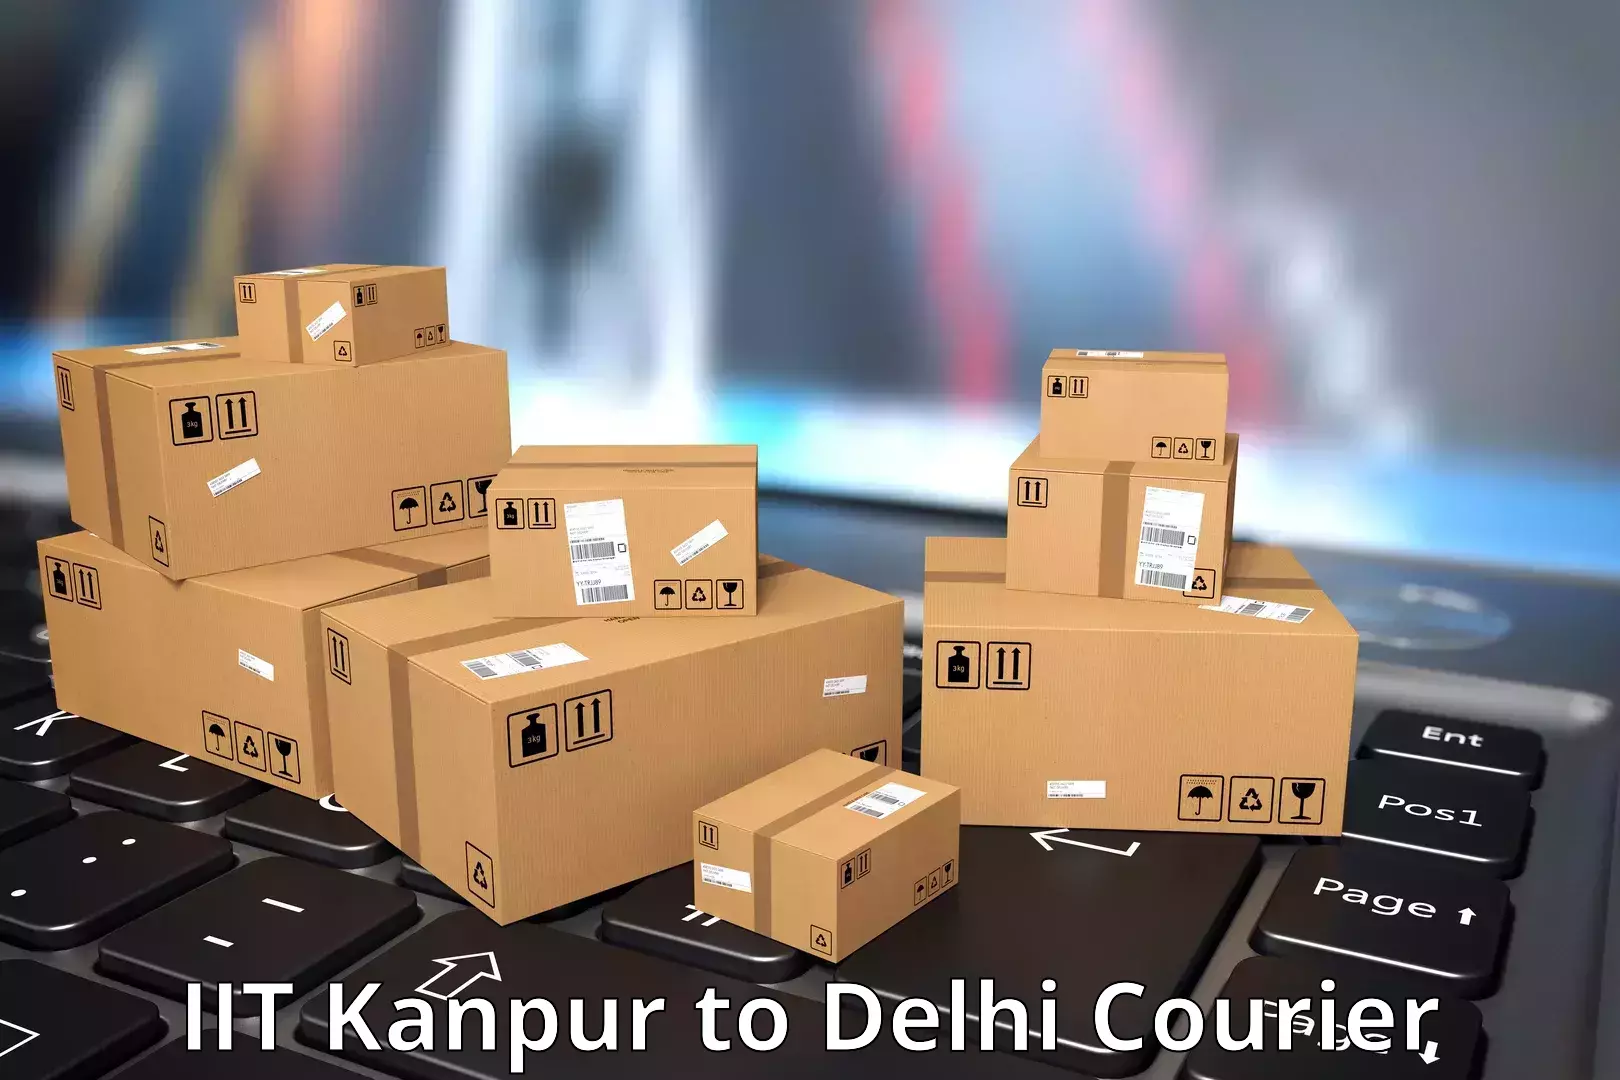 Reliable parcel services IIT Kanpur to Kalkaji